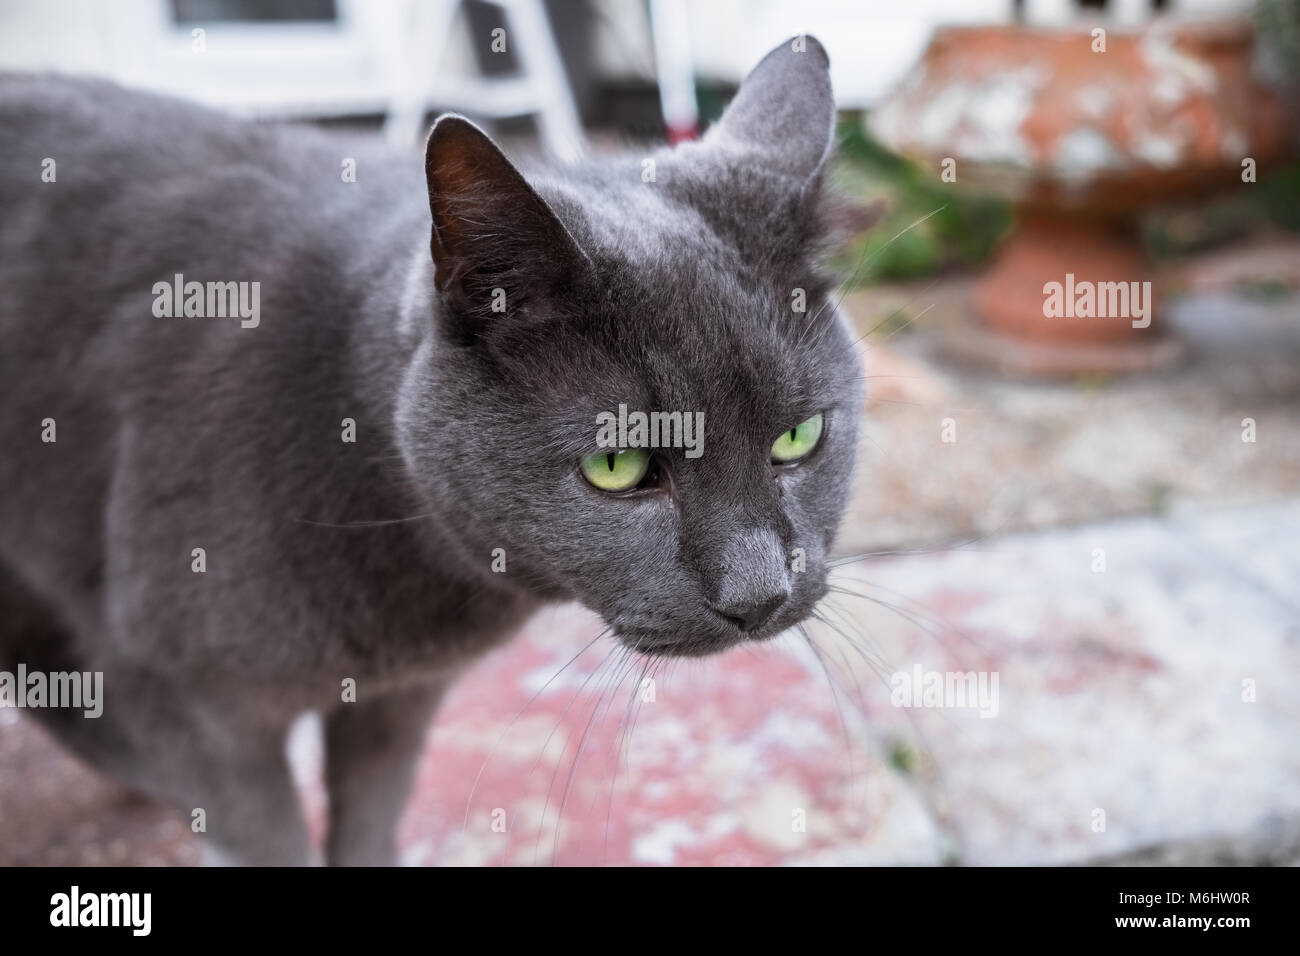 A green eyed cat staring at something Stock Photo